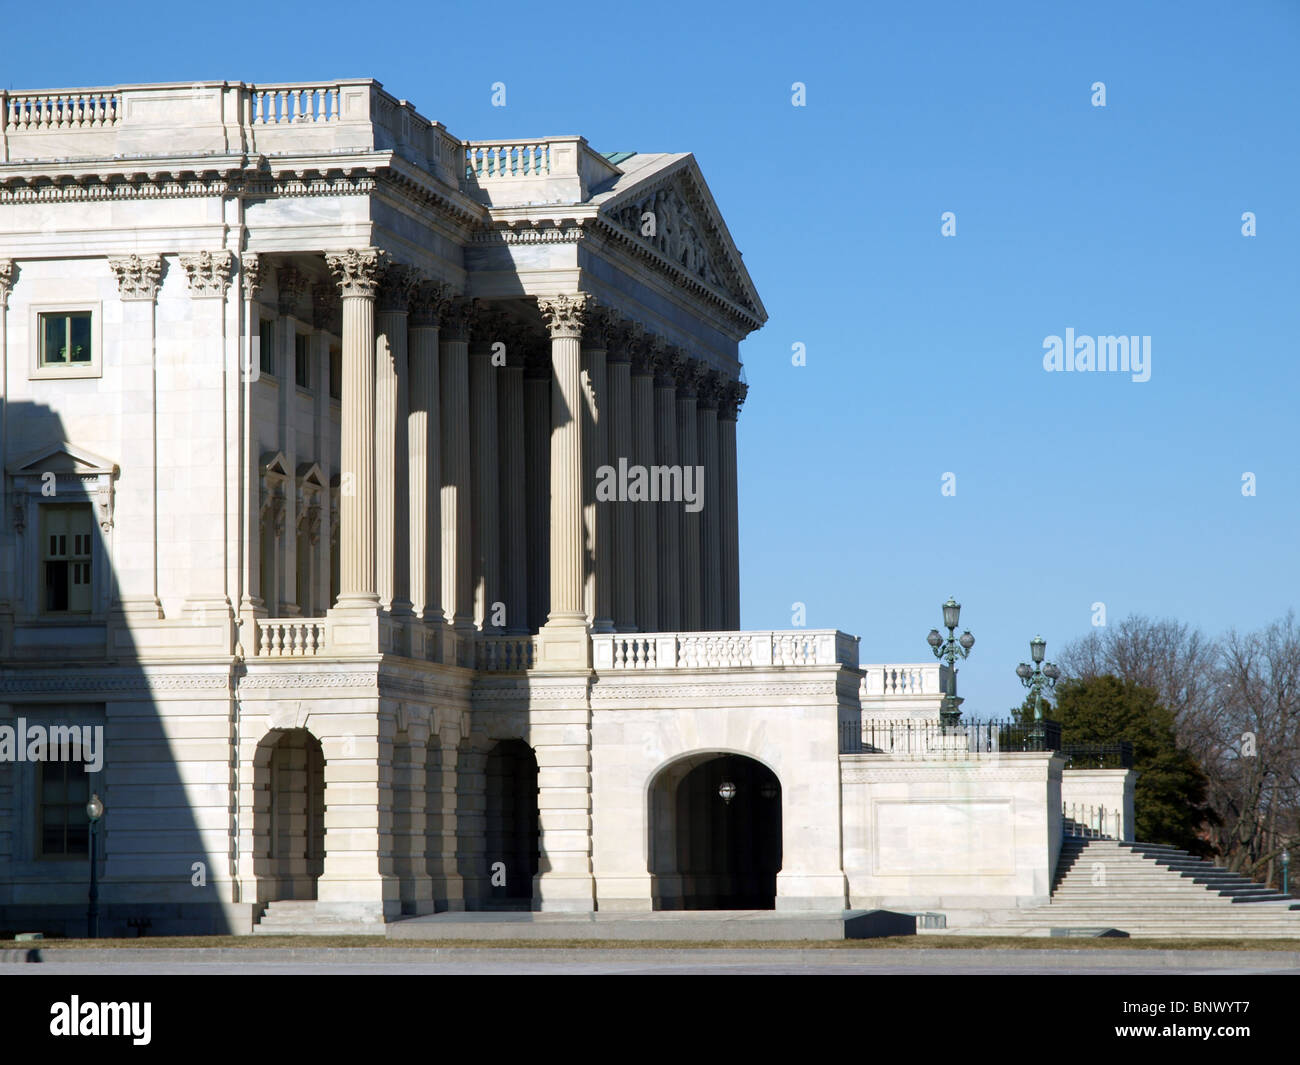 Profile of the United States Supreme Court building in Washington DC. Stock Photo